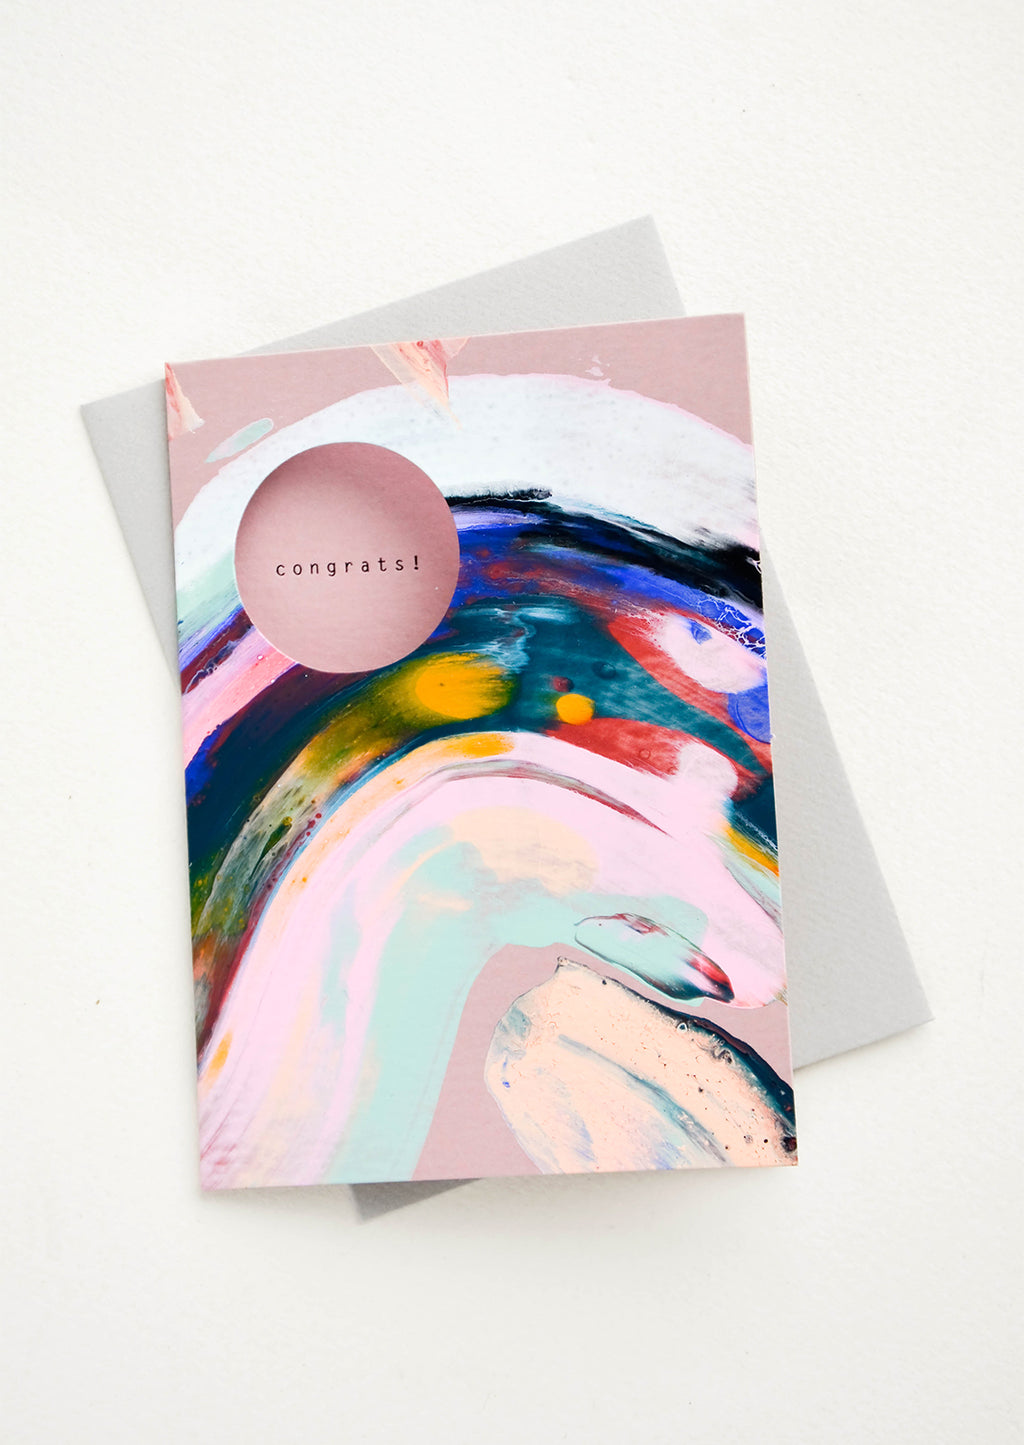 1: Greeting card with multicolor paint streak, circular cutout on front to reveal interior text